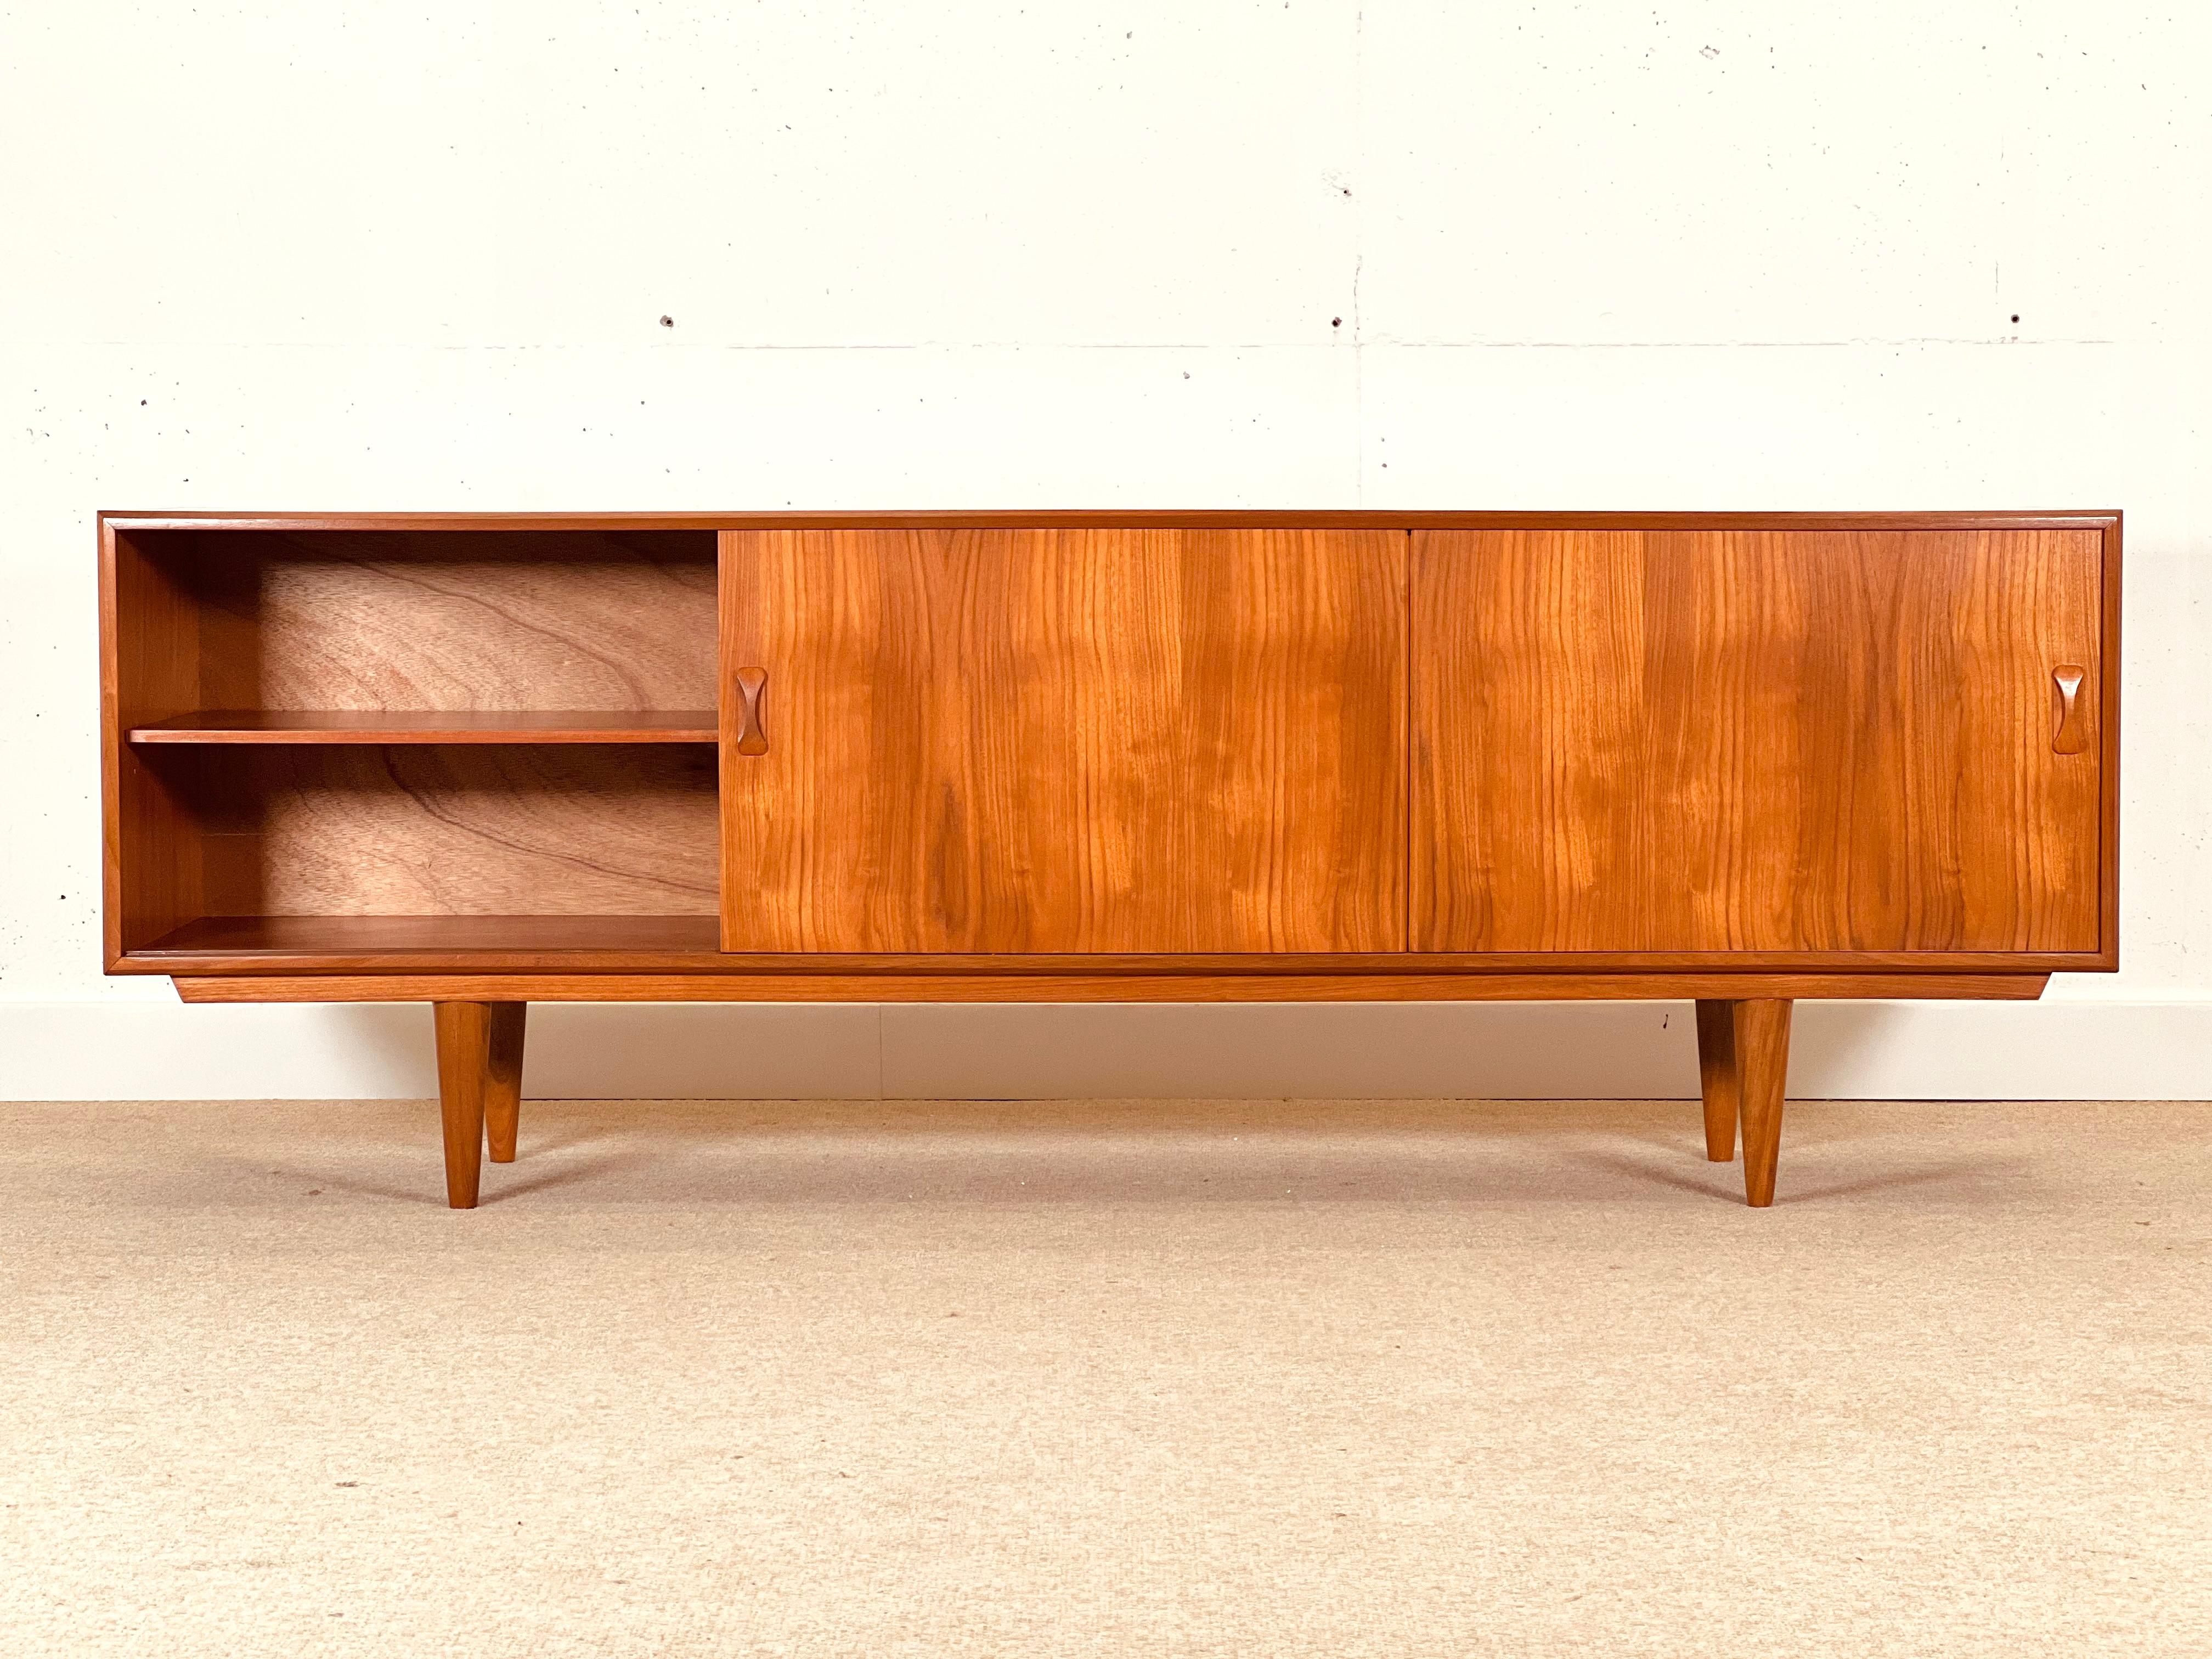 This long sideboard was high-end handcrafted in teak wood by Clausen & Son in Denmark in the early 60’s.

The sideboard is a superb piece with a symmetrical design, a bank of drawers in the middle and a cupboard on each side enclosed by sliding